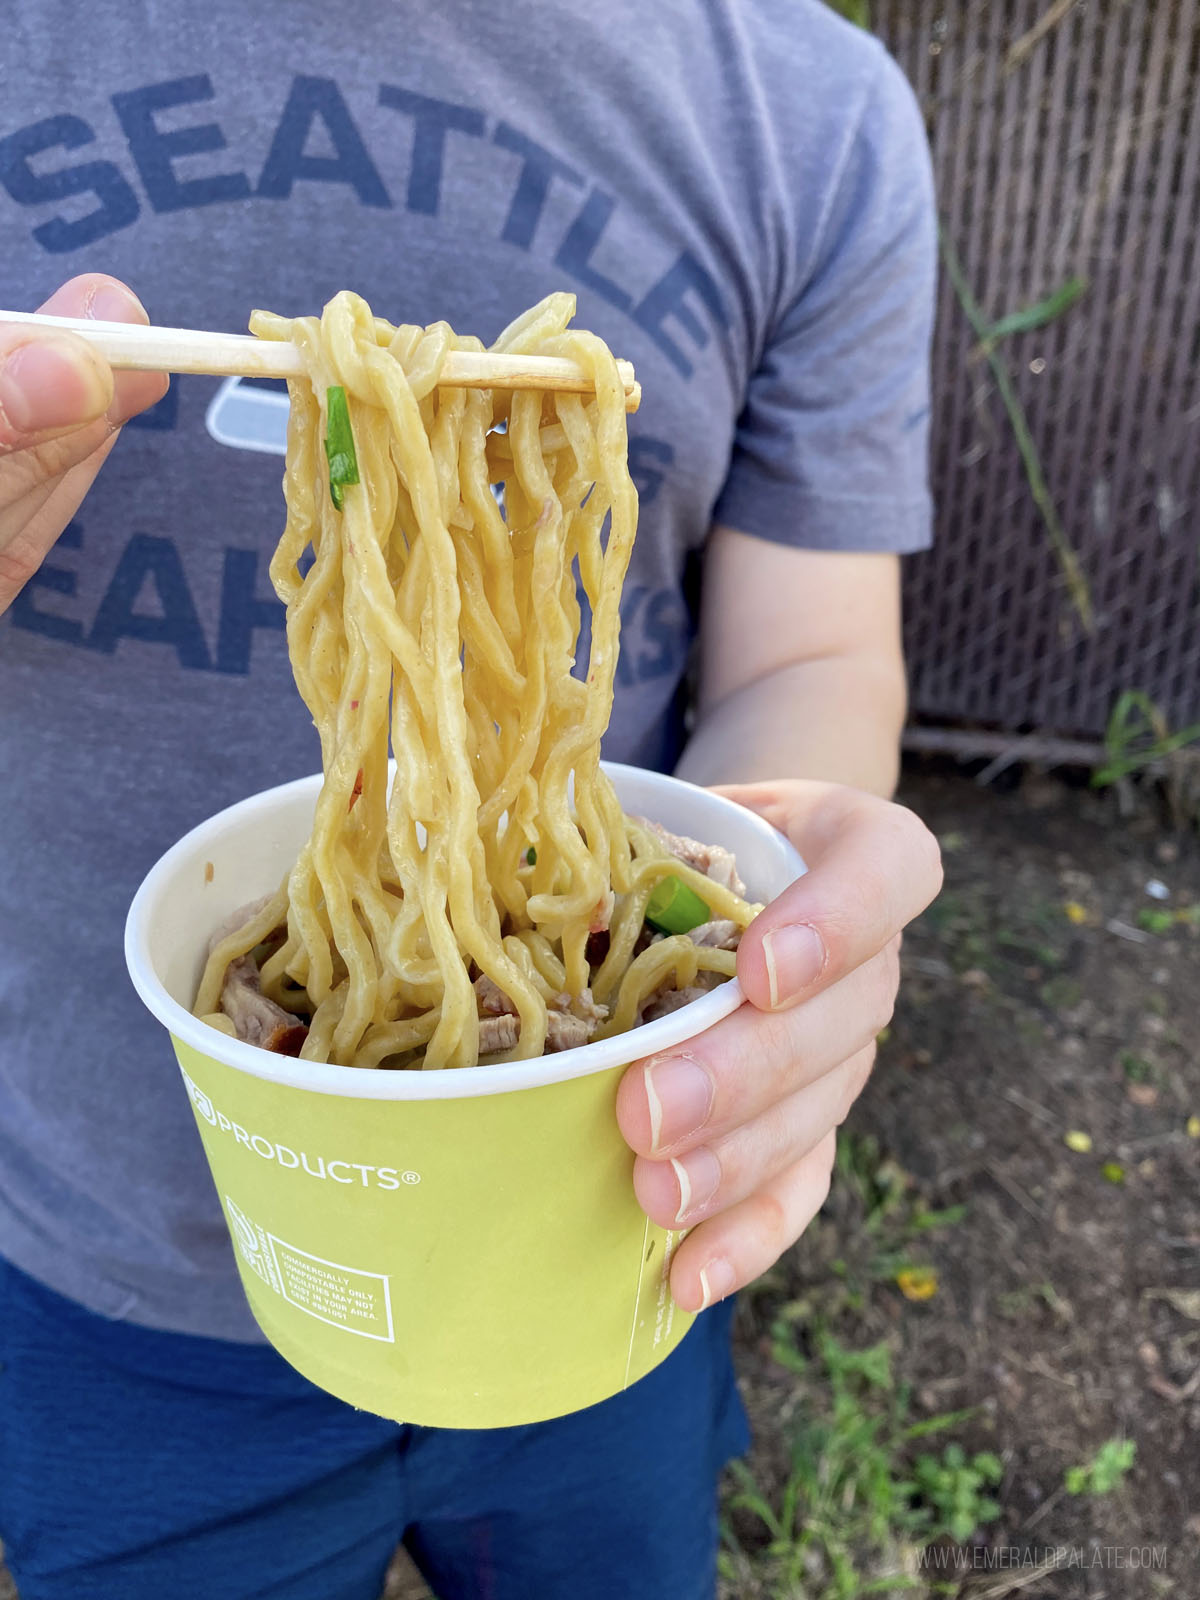 person pulling noodles from a takeout soup container